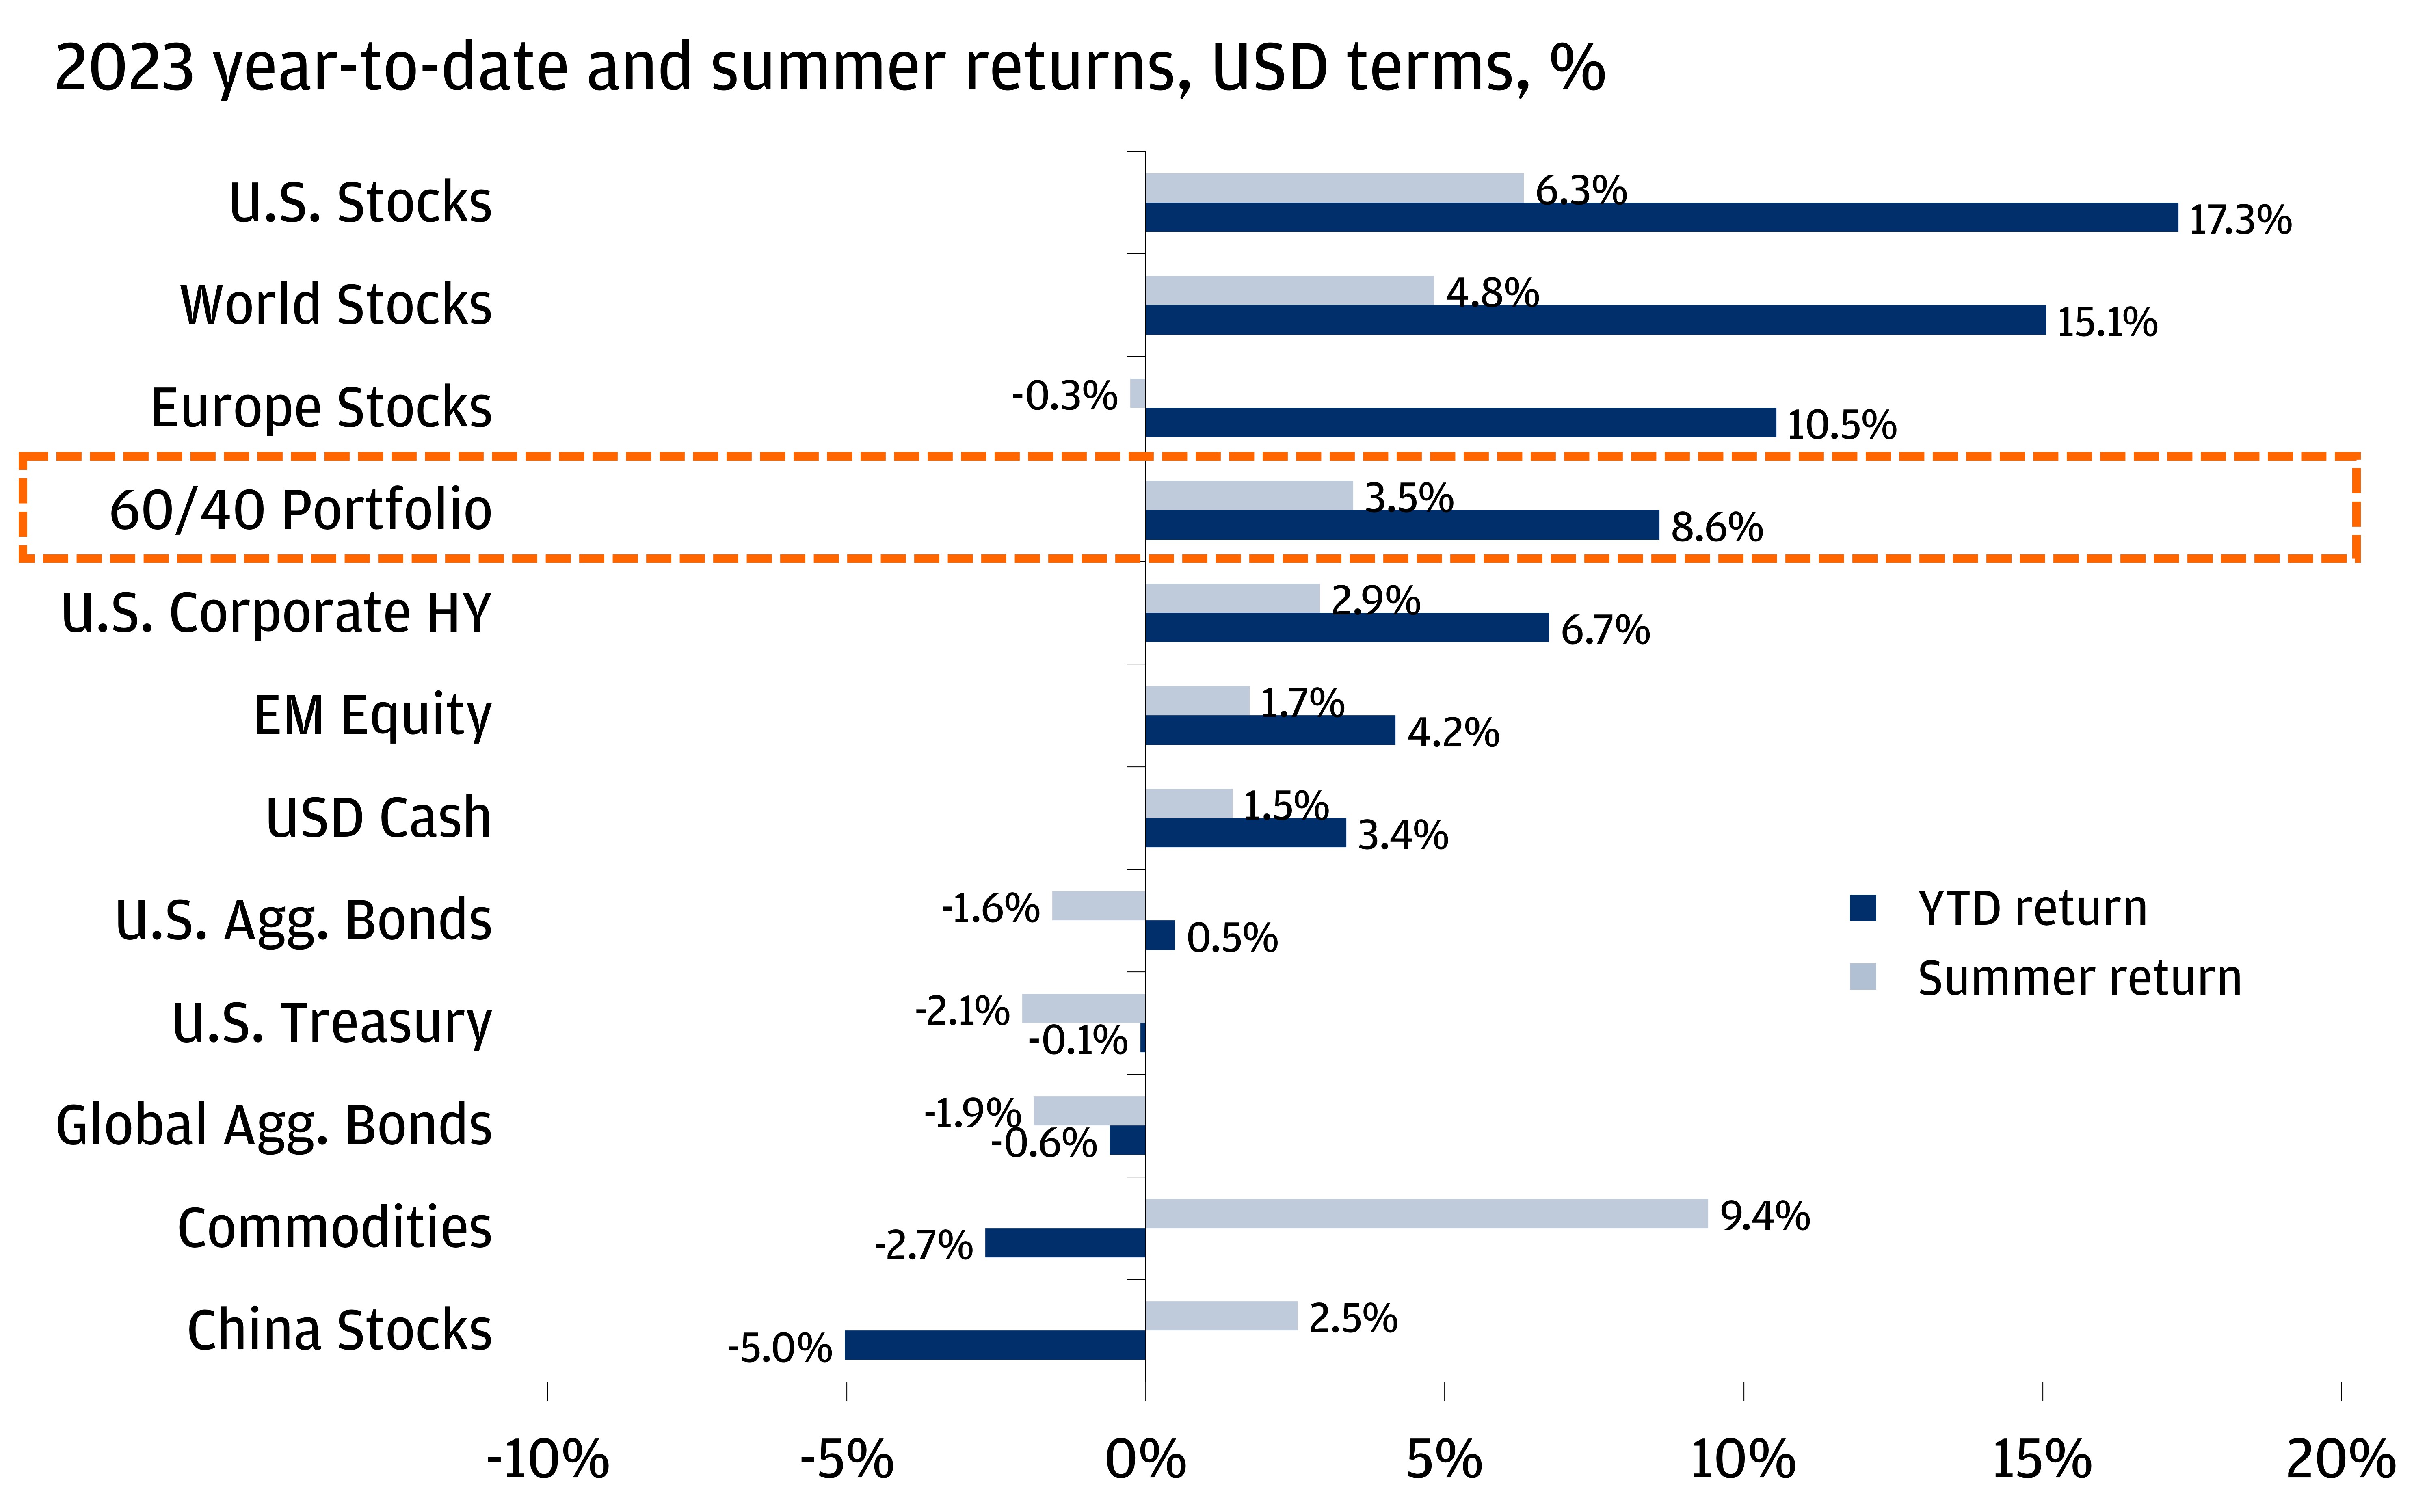 This chart shows 2023 YTD and summer returns in USD terms, with summer defined as May 31, 2023 to September 7, 2023. 